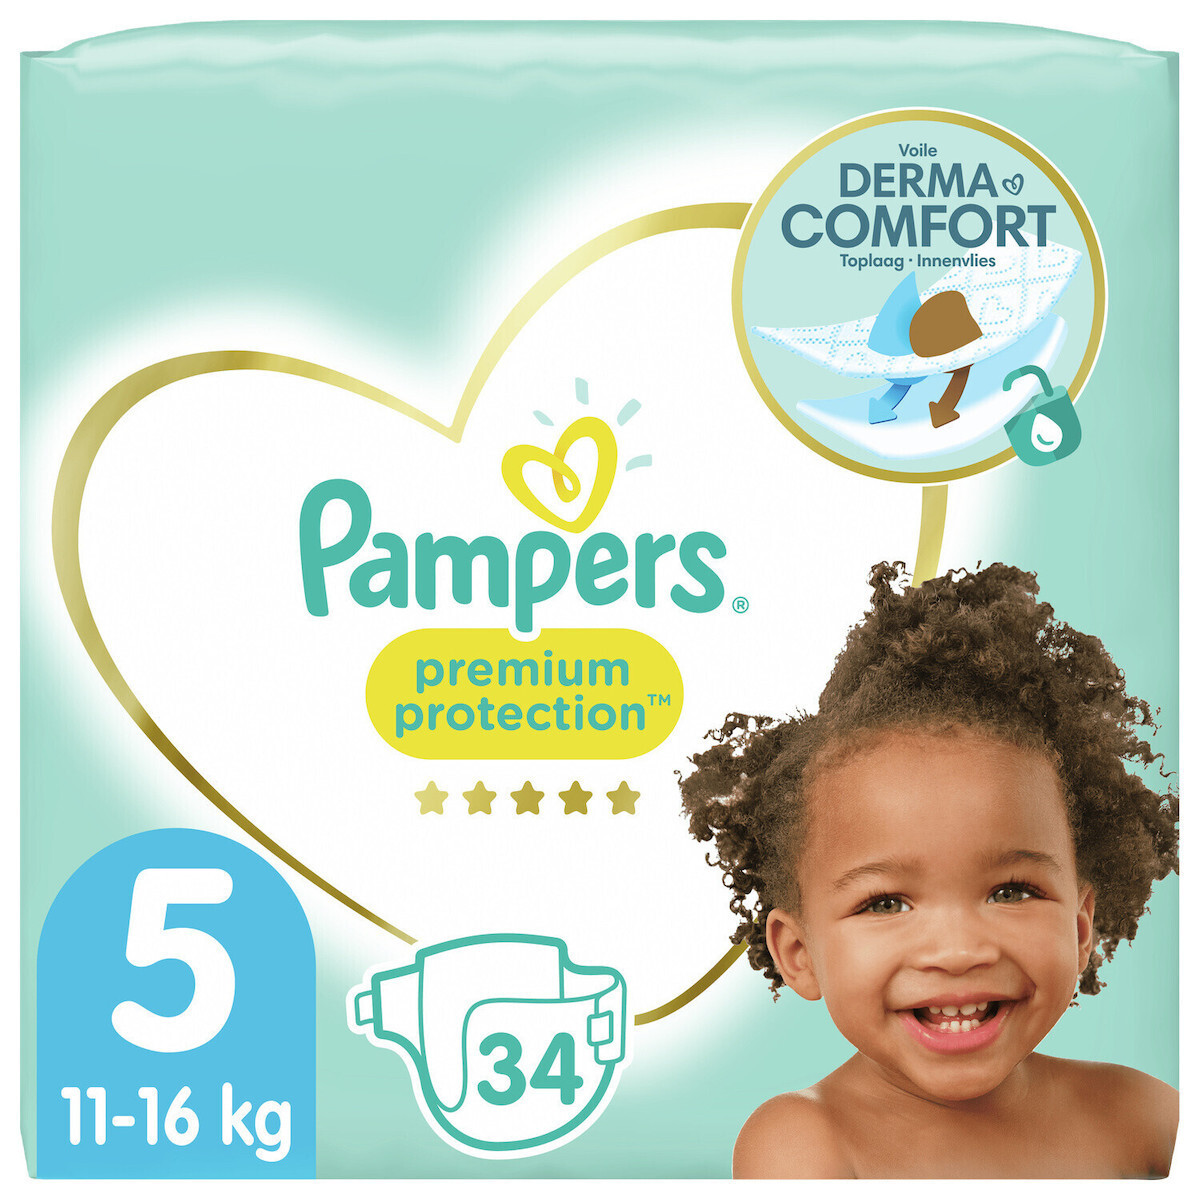 Pampers taille 4 ( 7-18KG ) 44pcs